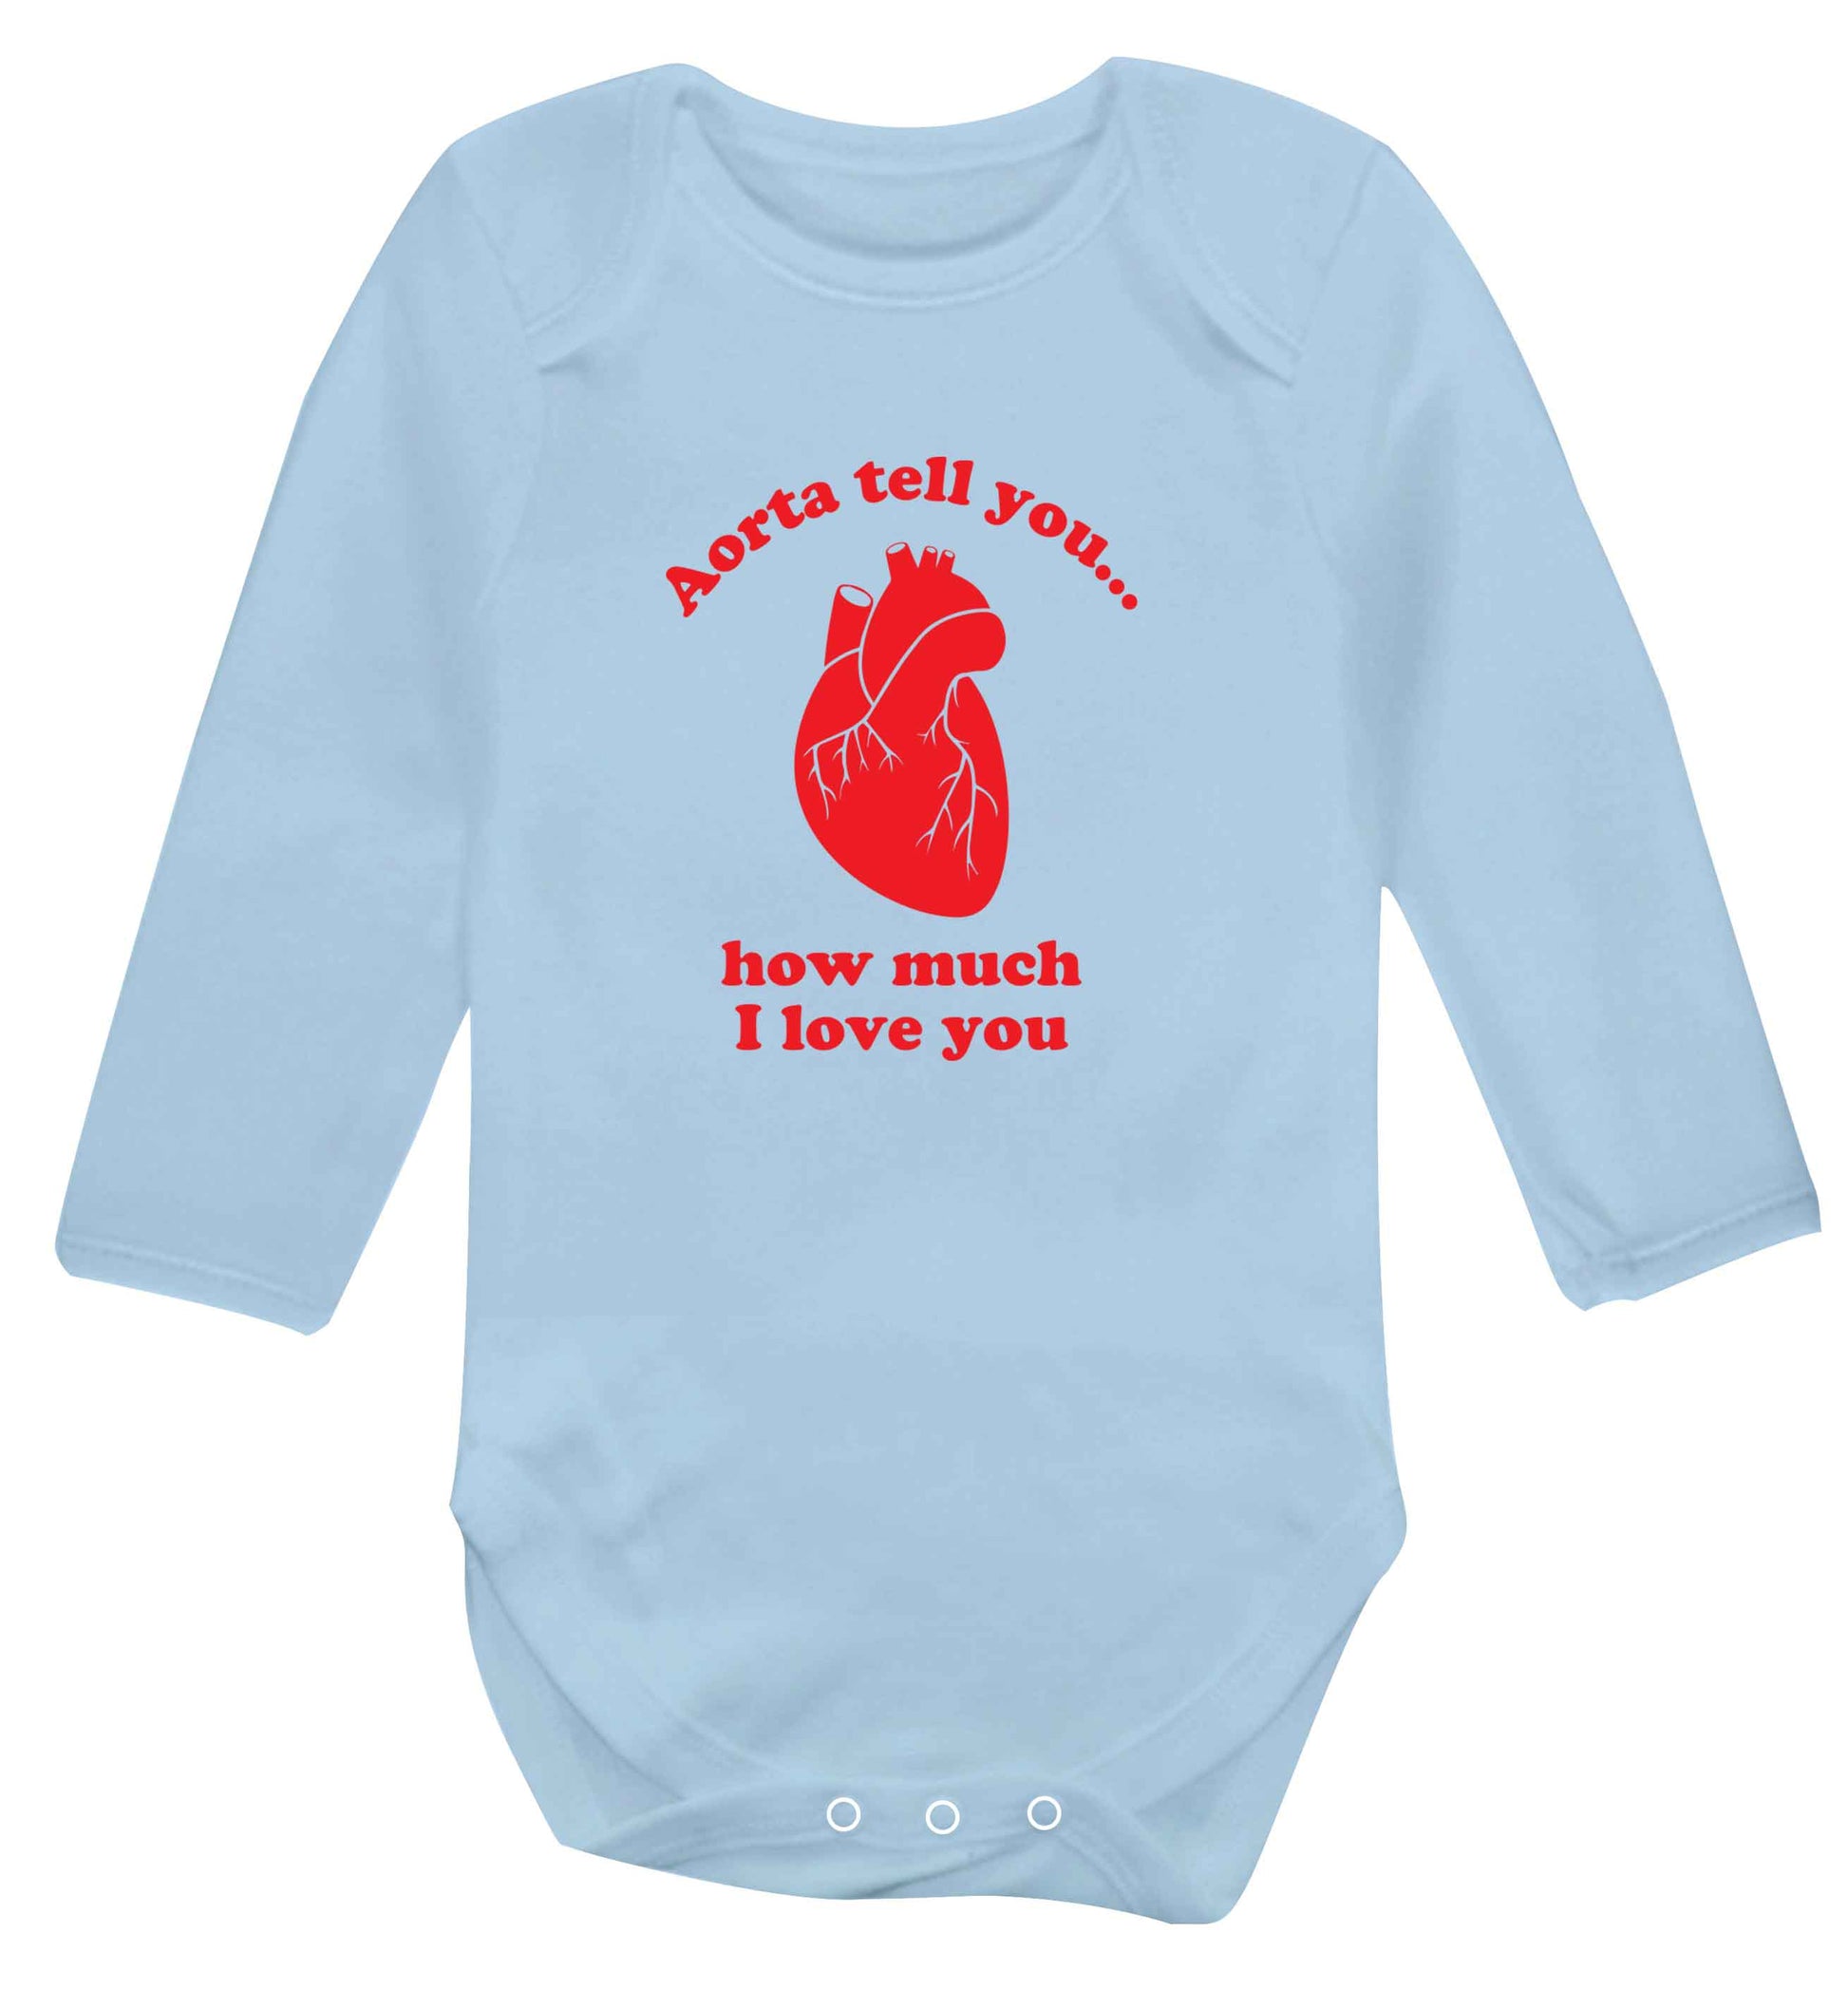 Aorta tell you how much I love you baby vest long sleeved pale blue 6-12 months